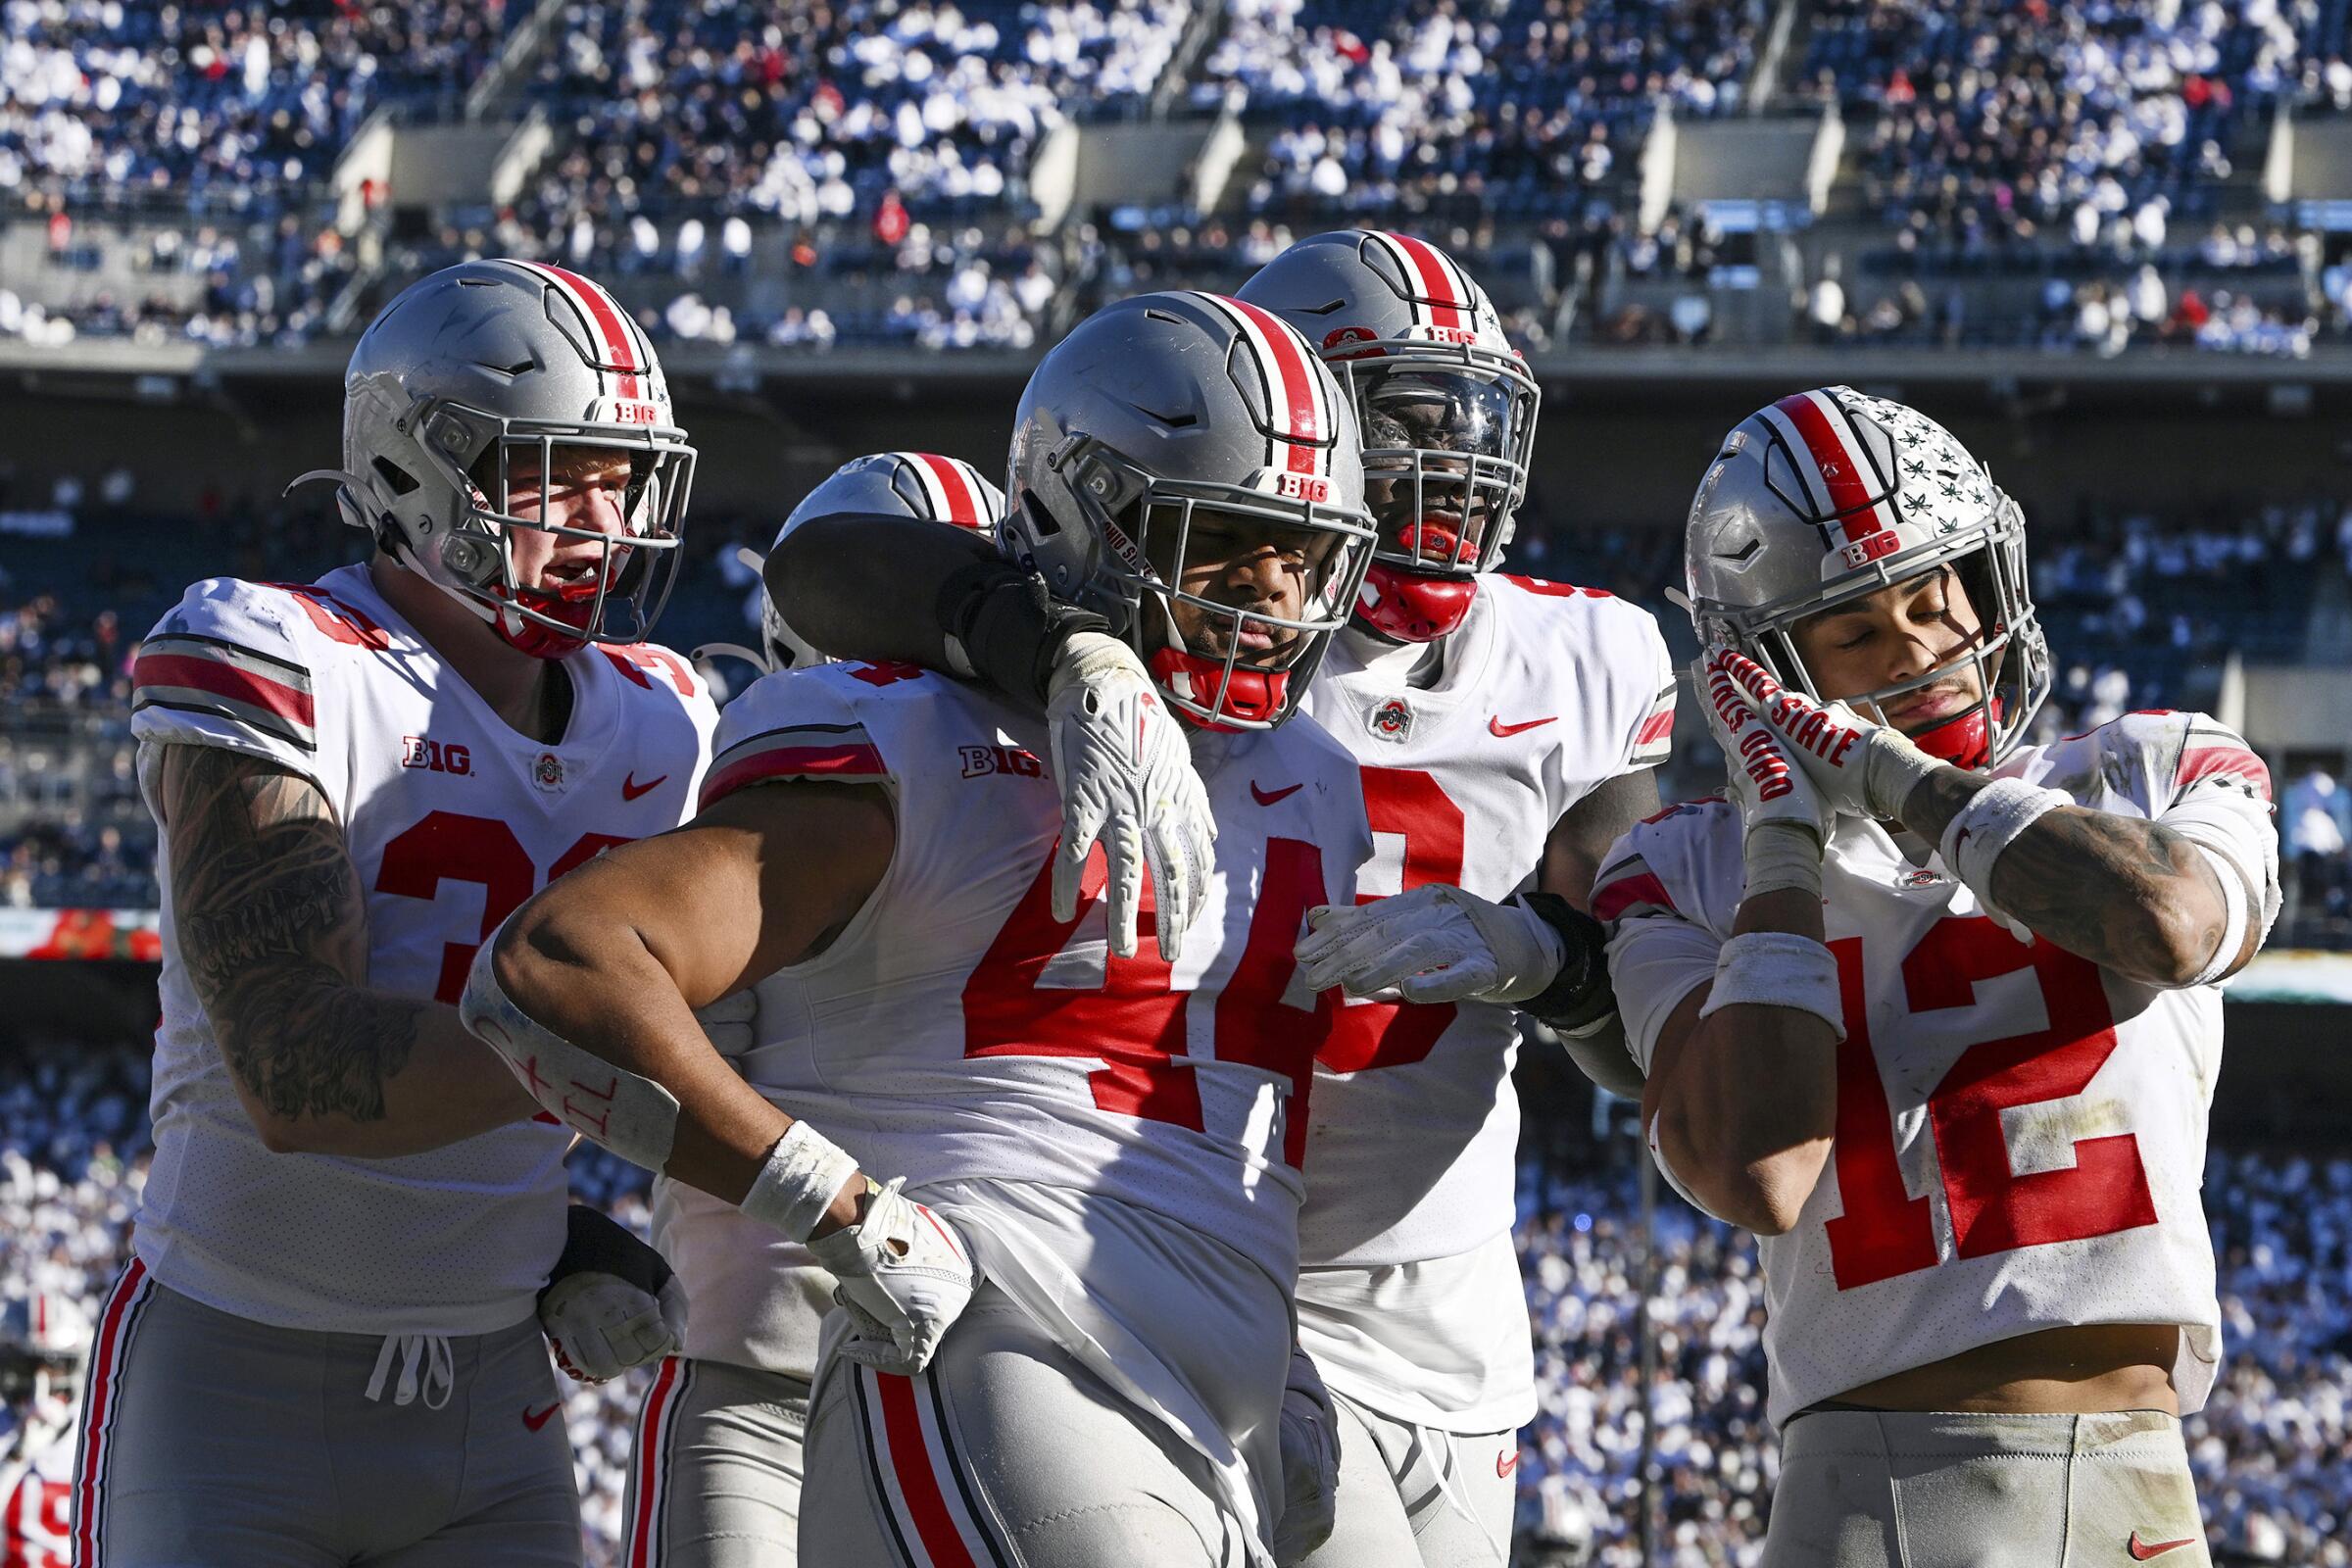 Ohio State defensive end J.T. Tuimoloau celebrates with his teammates after returning an interception for a touchdown.